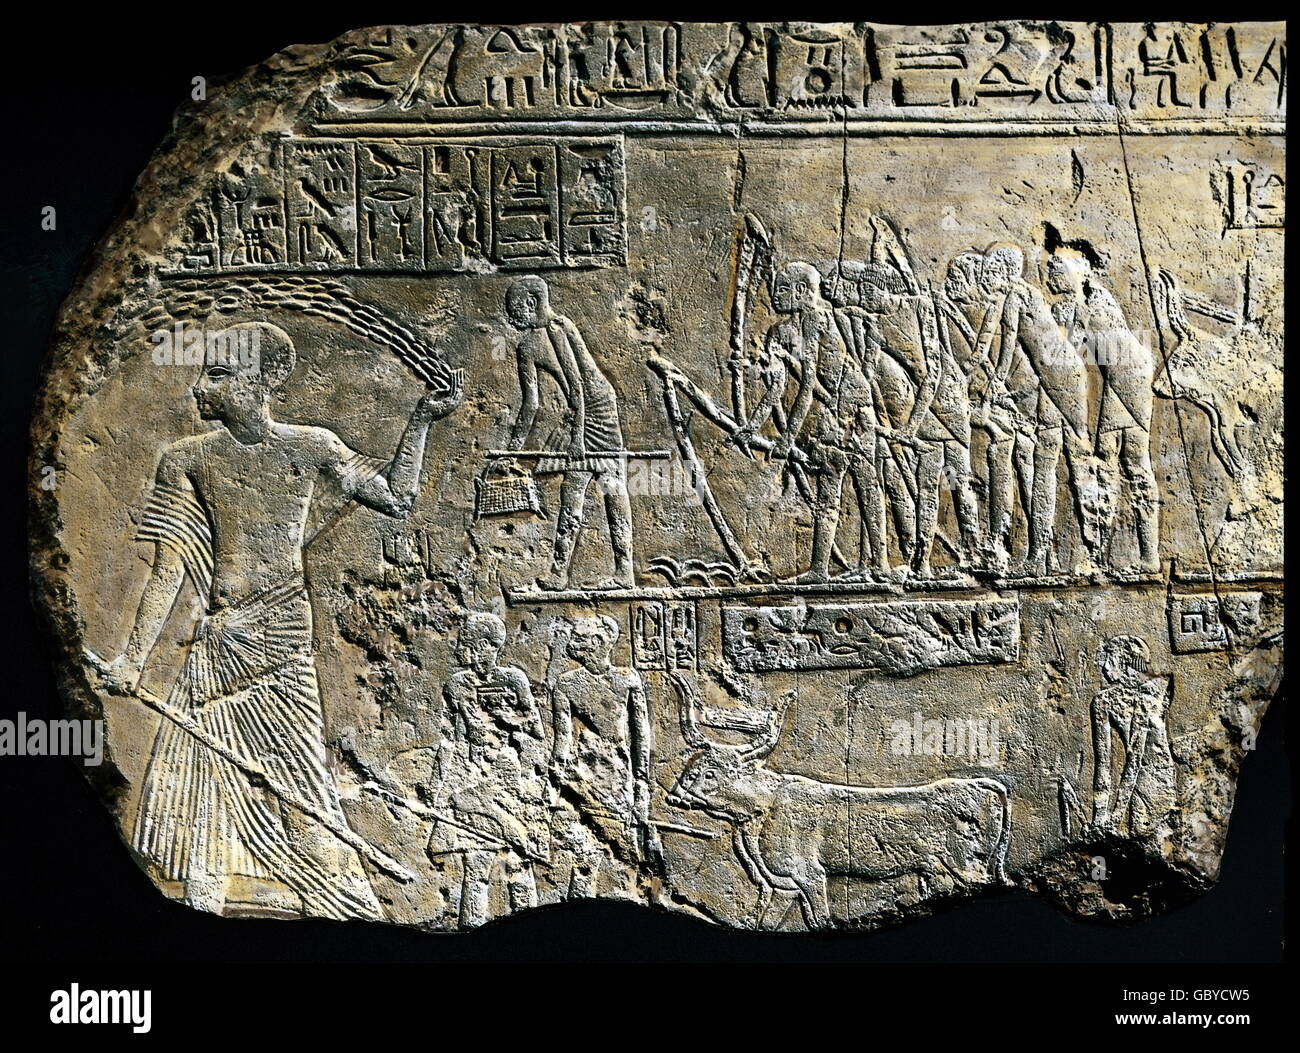 Géographie / Voyage, Egypte, agriculture, culture, relief, fragment, calcaire, tombe de Meriptah, Memphis, 19e dynastie (1306 - 1186 av. J.-C.), Wuerttembergisches Landesmuseum Karlsruhe, Additional-Rights-Clearences-Not Available Banque D'Images